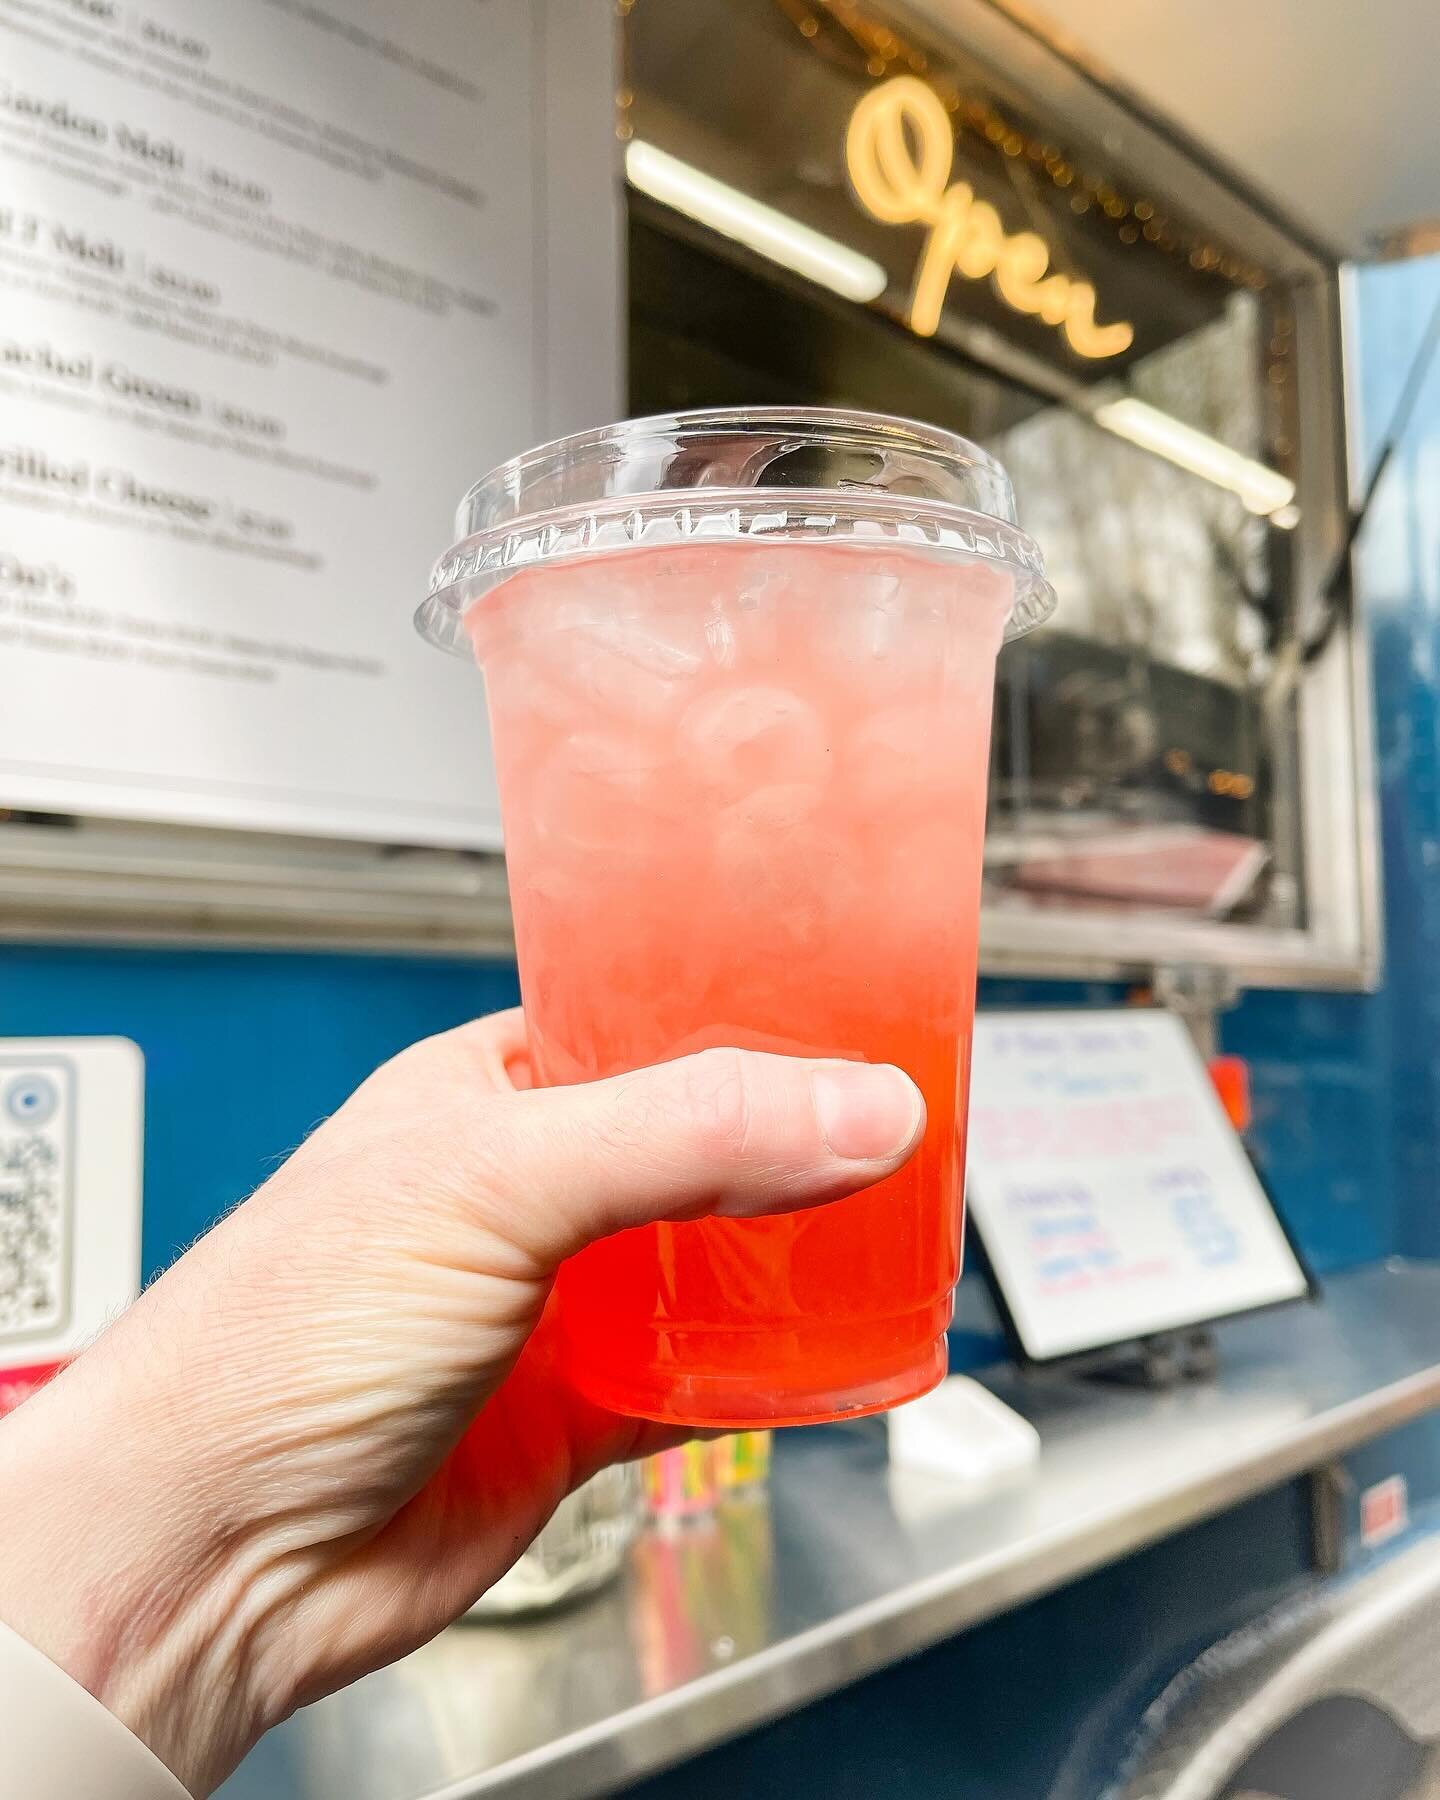 🍋Lemonade Season is upon us! 🍋

We&rsquo;ve got two options for you! Our fan favorite The Georgia Peach 🍓 🍑 or grab the always reliable Classic Lemonade!

Stop by @arborlookcarts today. We&rsquo;re open from 12p-8p unless we sell out! And don&rsq